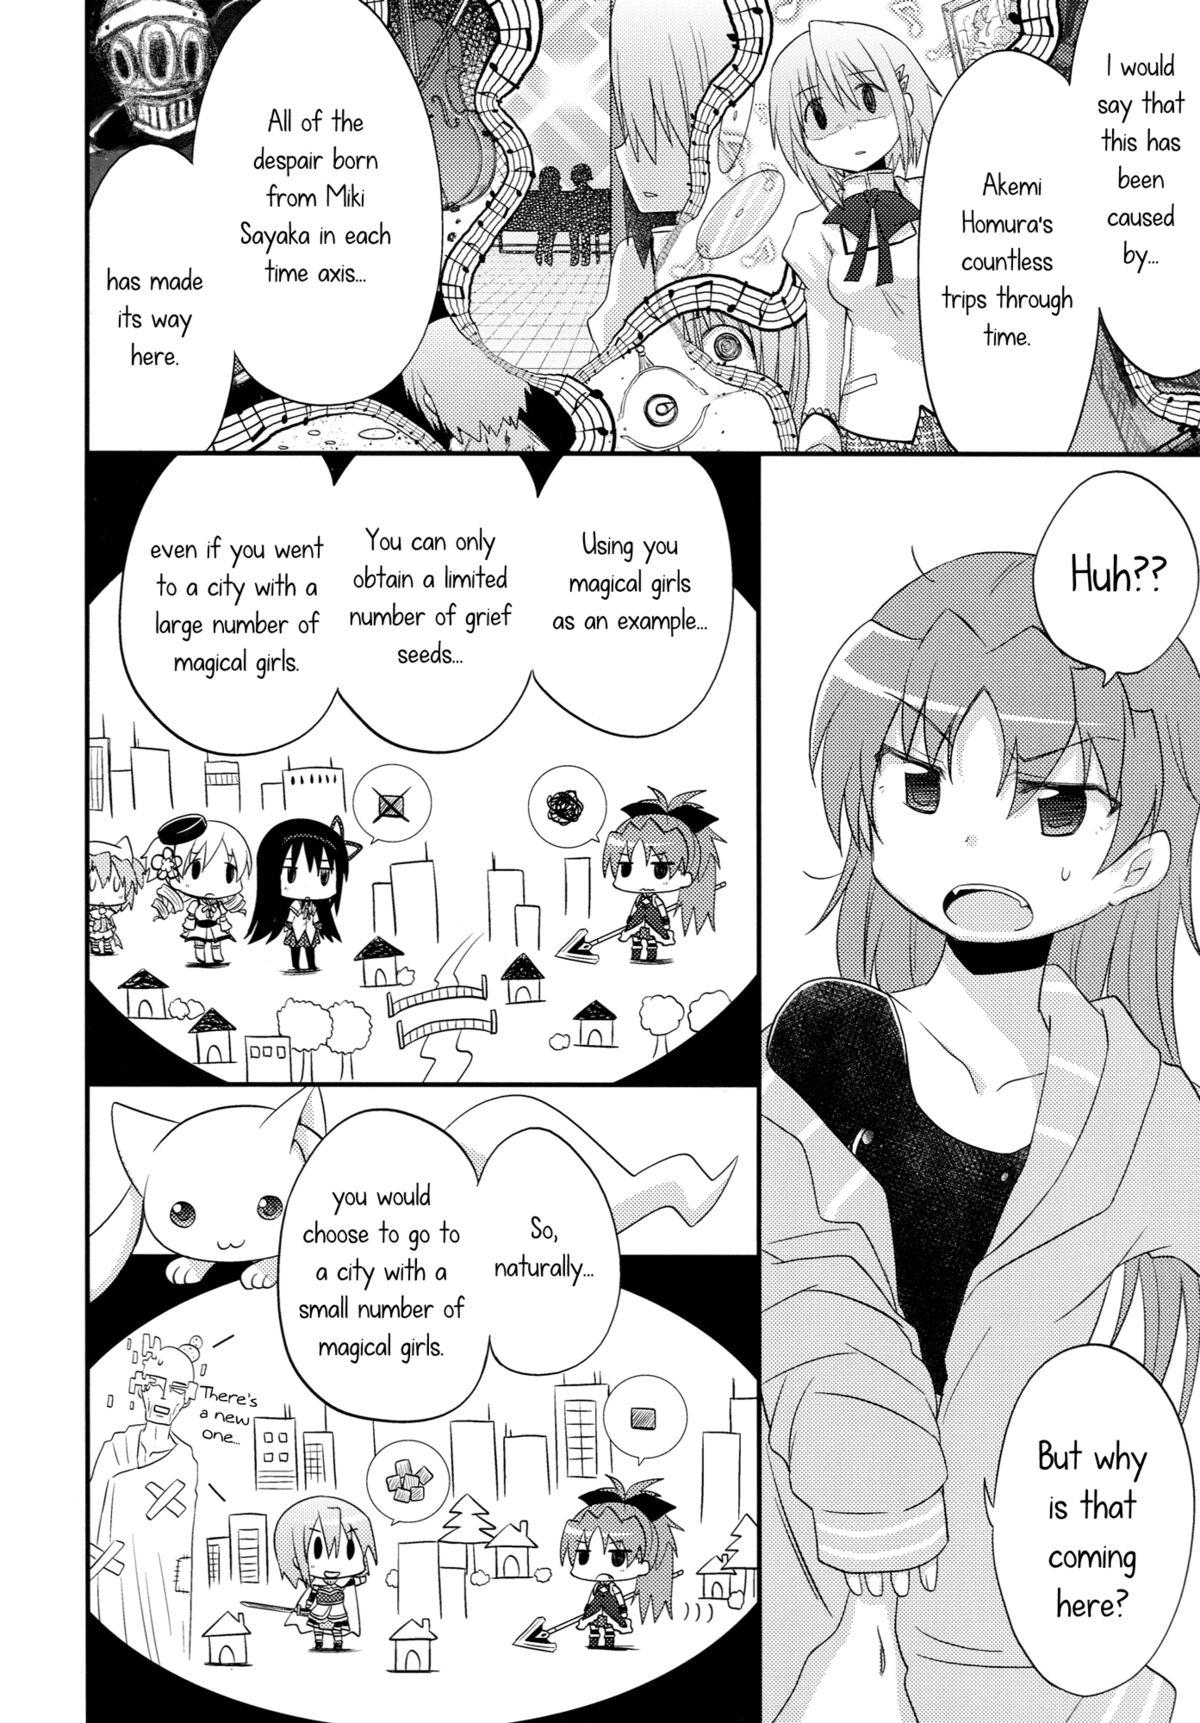 Web Our Courting War Front - Puella magi madoka magica Fucking - Page 9